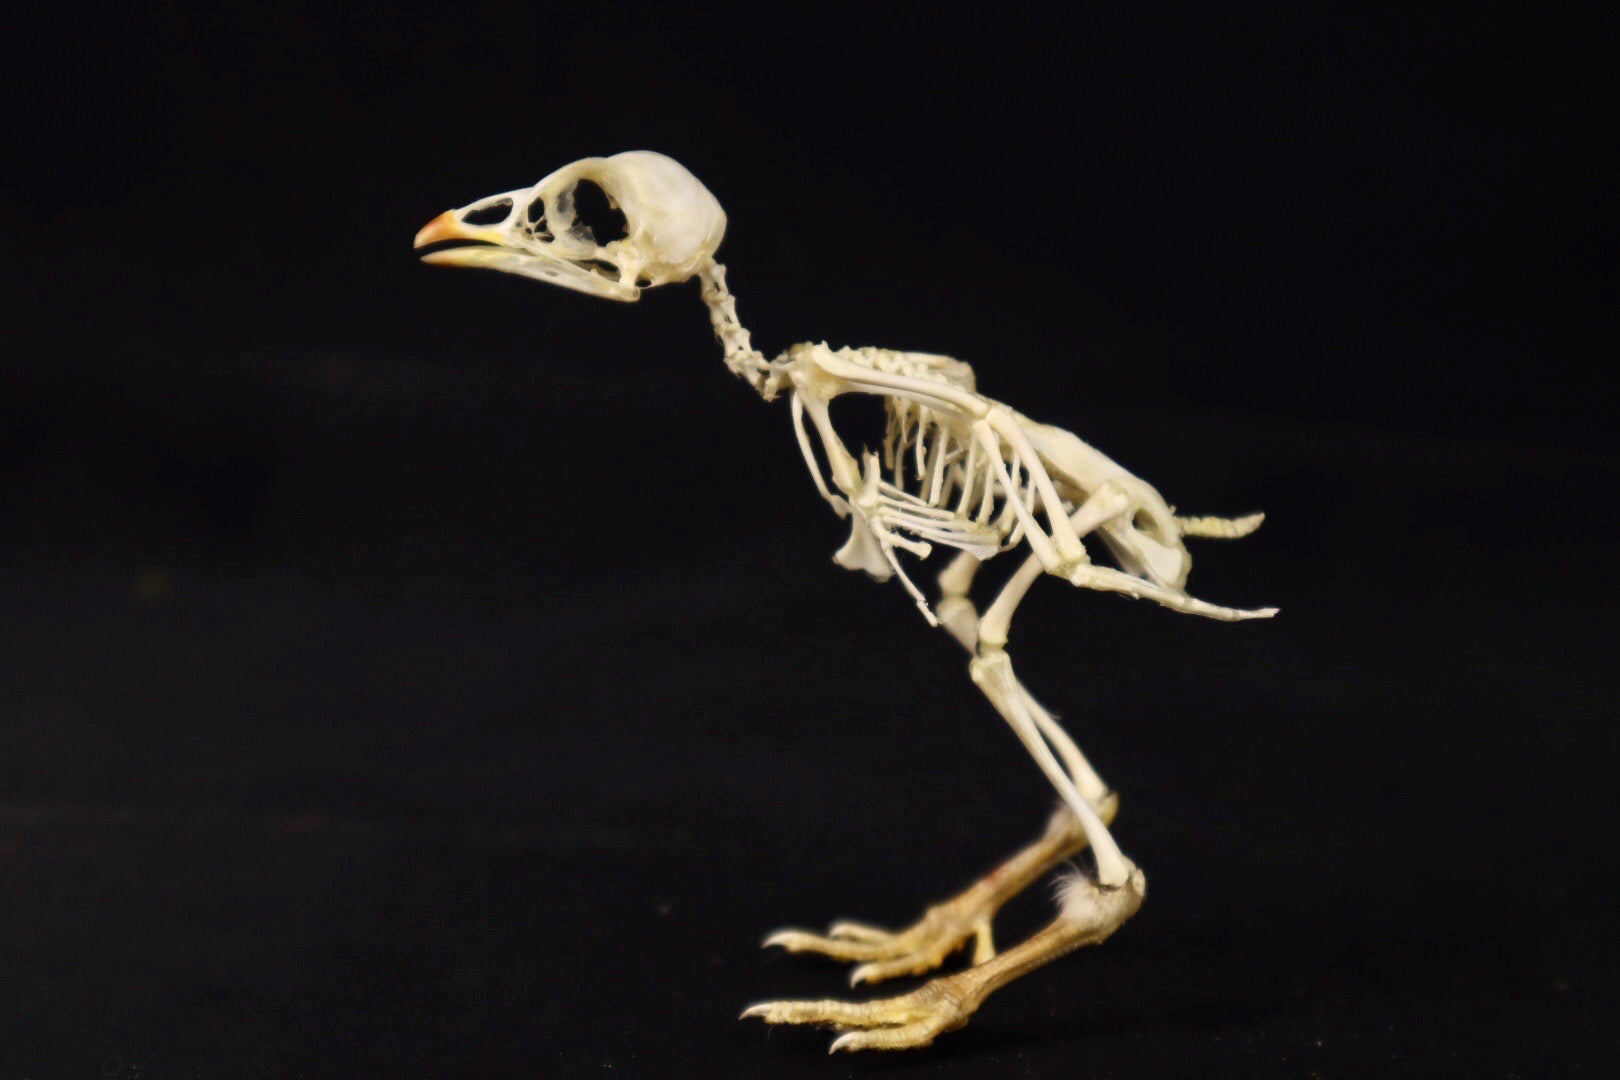 Sub-Adult Chicken Articulation in Glass Display Case